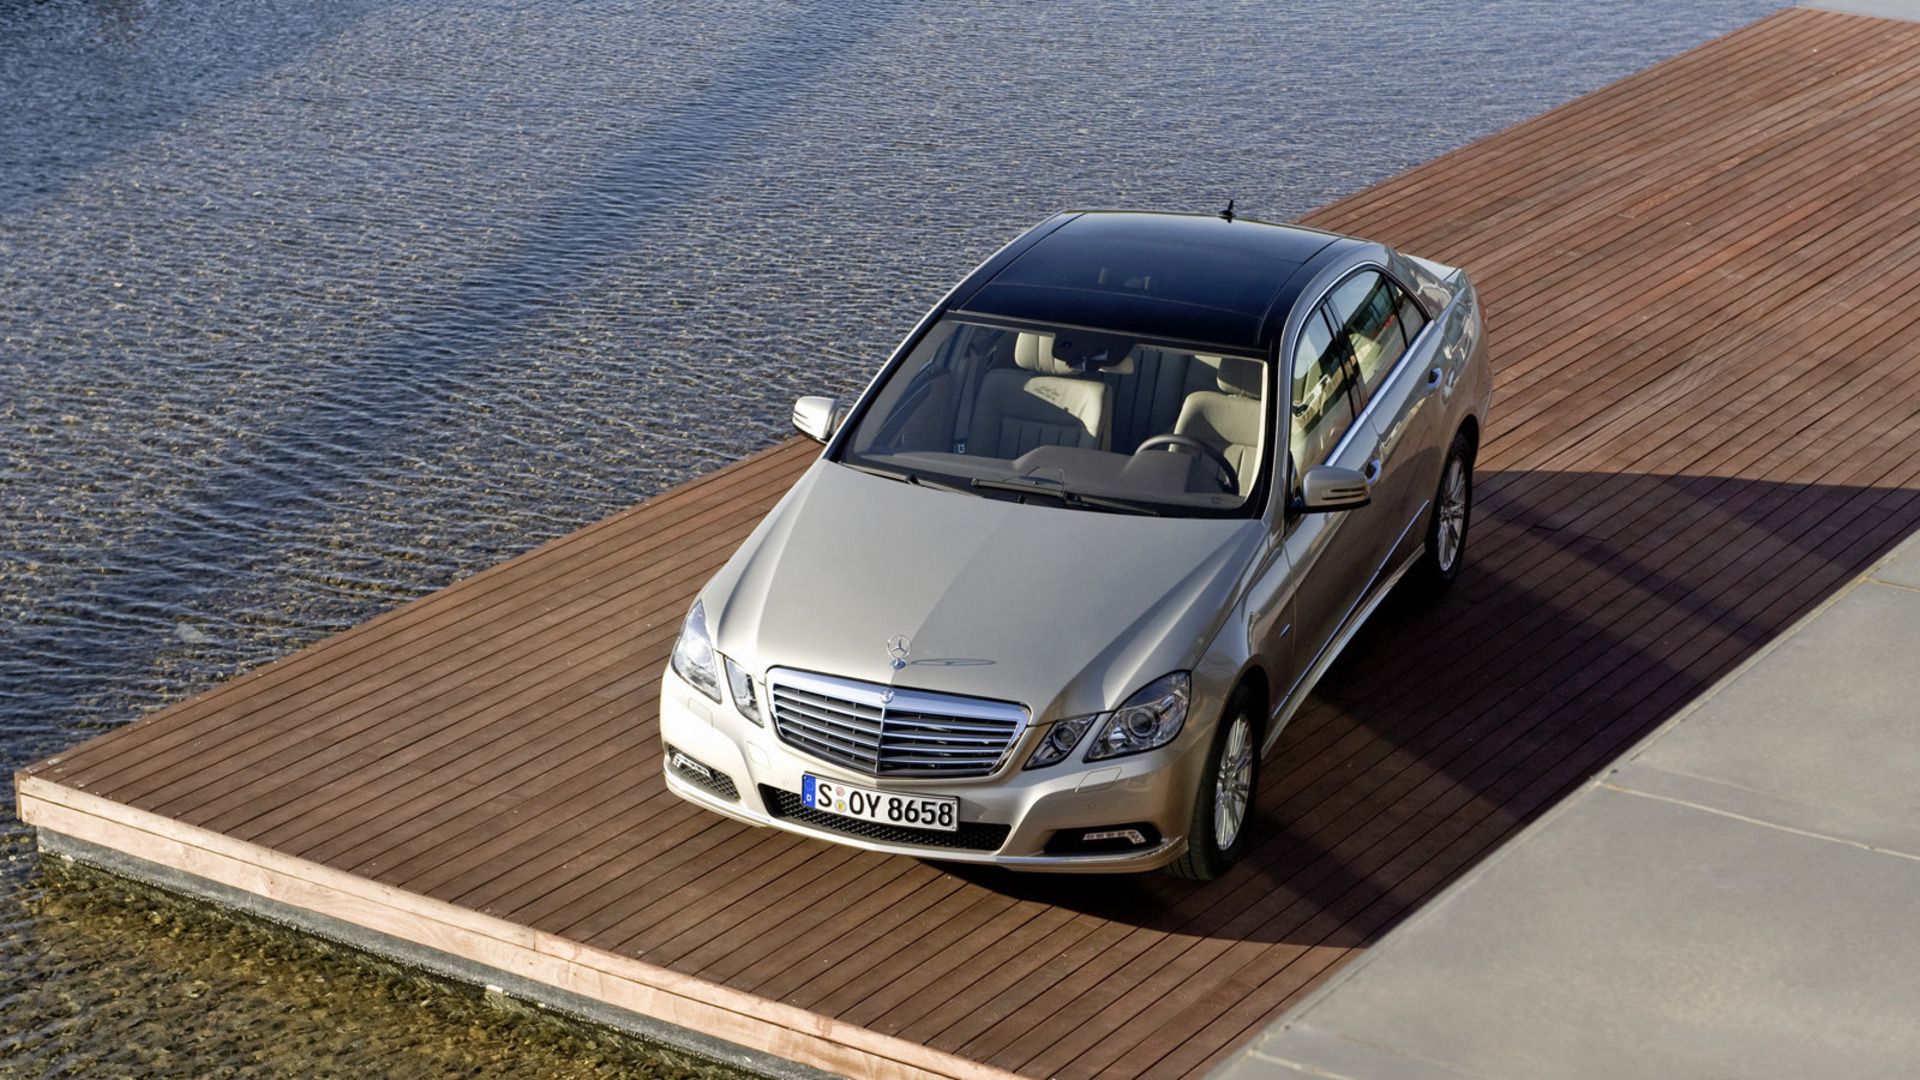 Silver 2010 Mercedes-Benz E 350 Sedan Parked On Deck Top 3/4 View